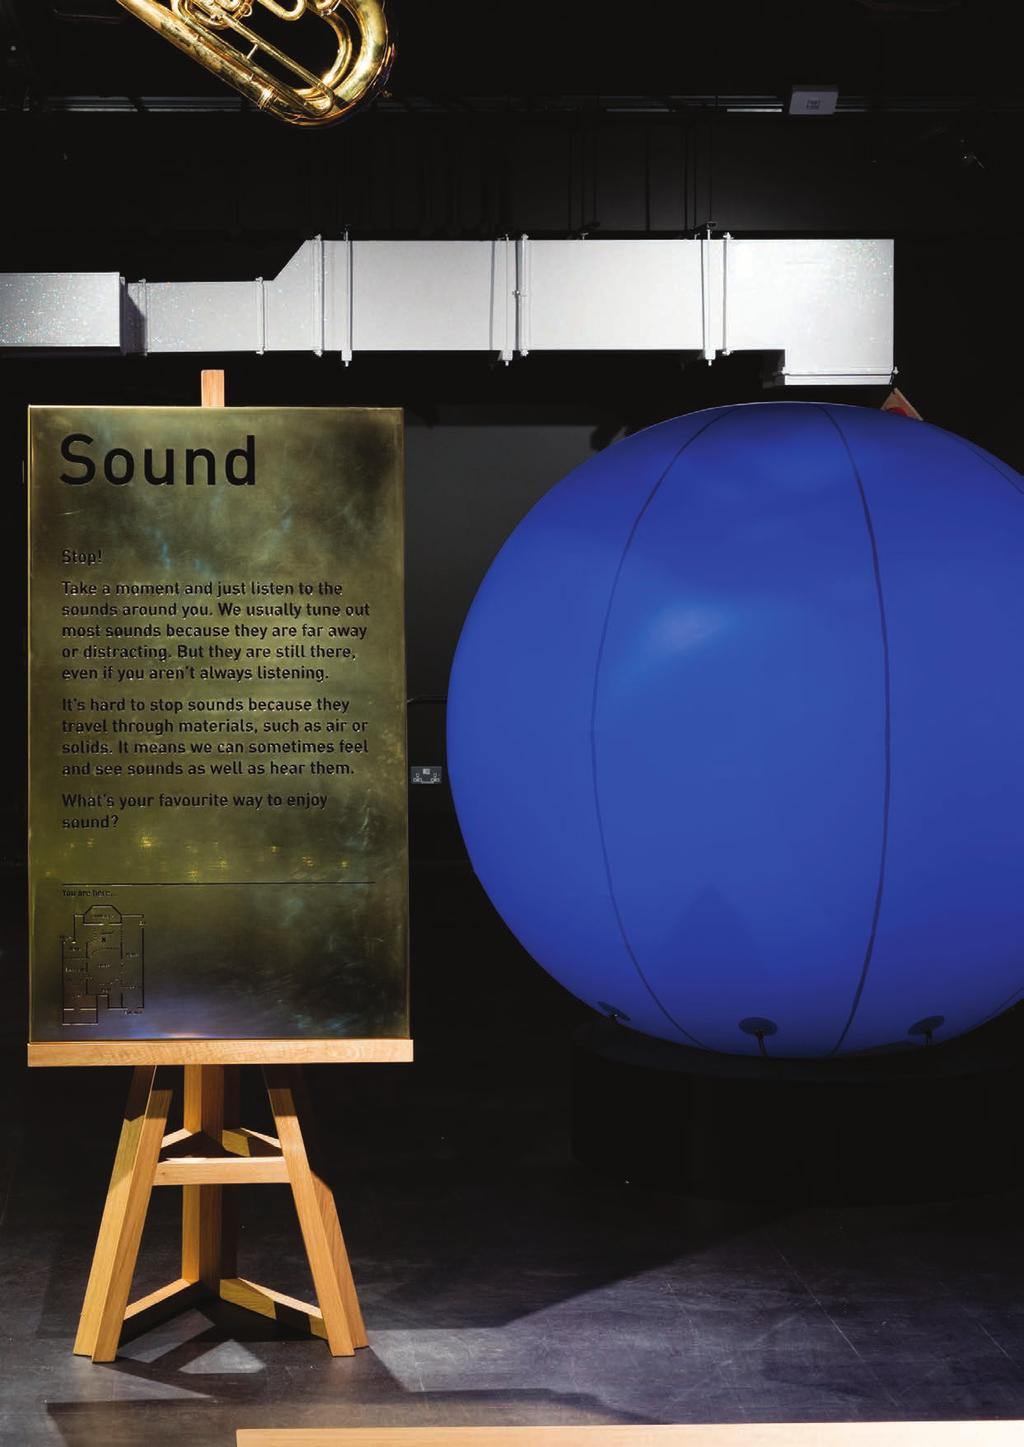 Wonderlab The Statoil Gallery and maths s Sound Age (s) Topic 7 11 LIGHT